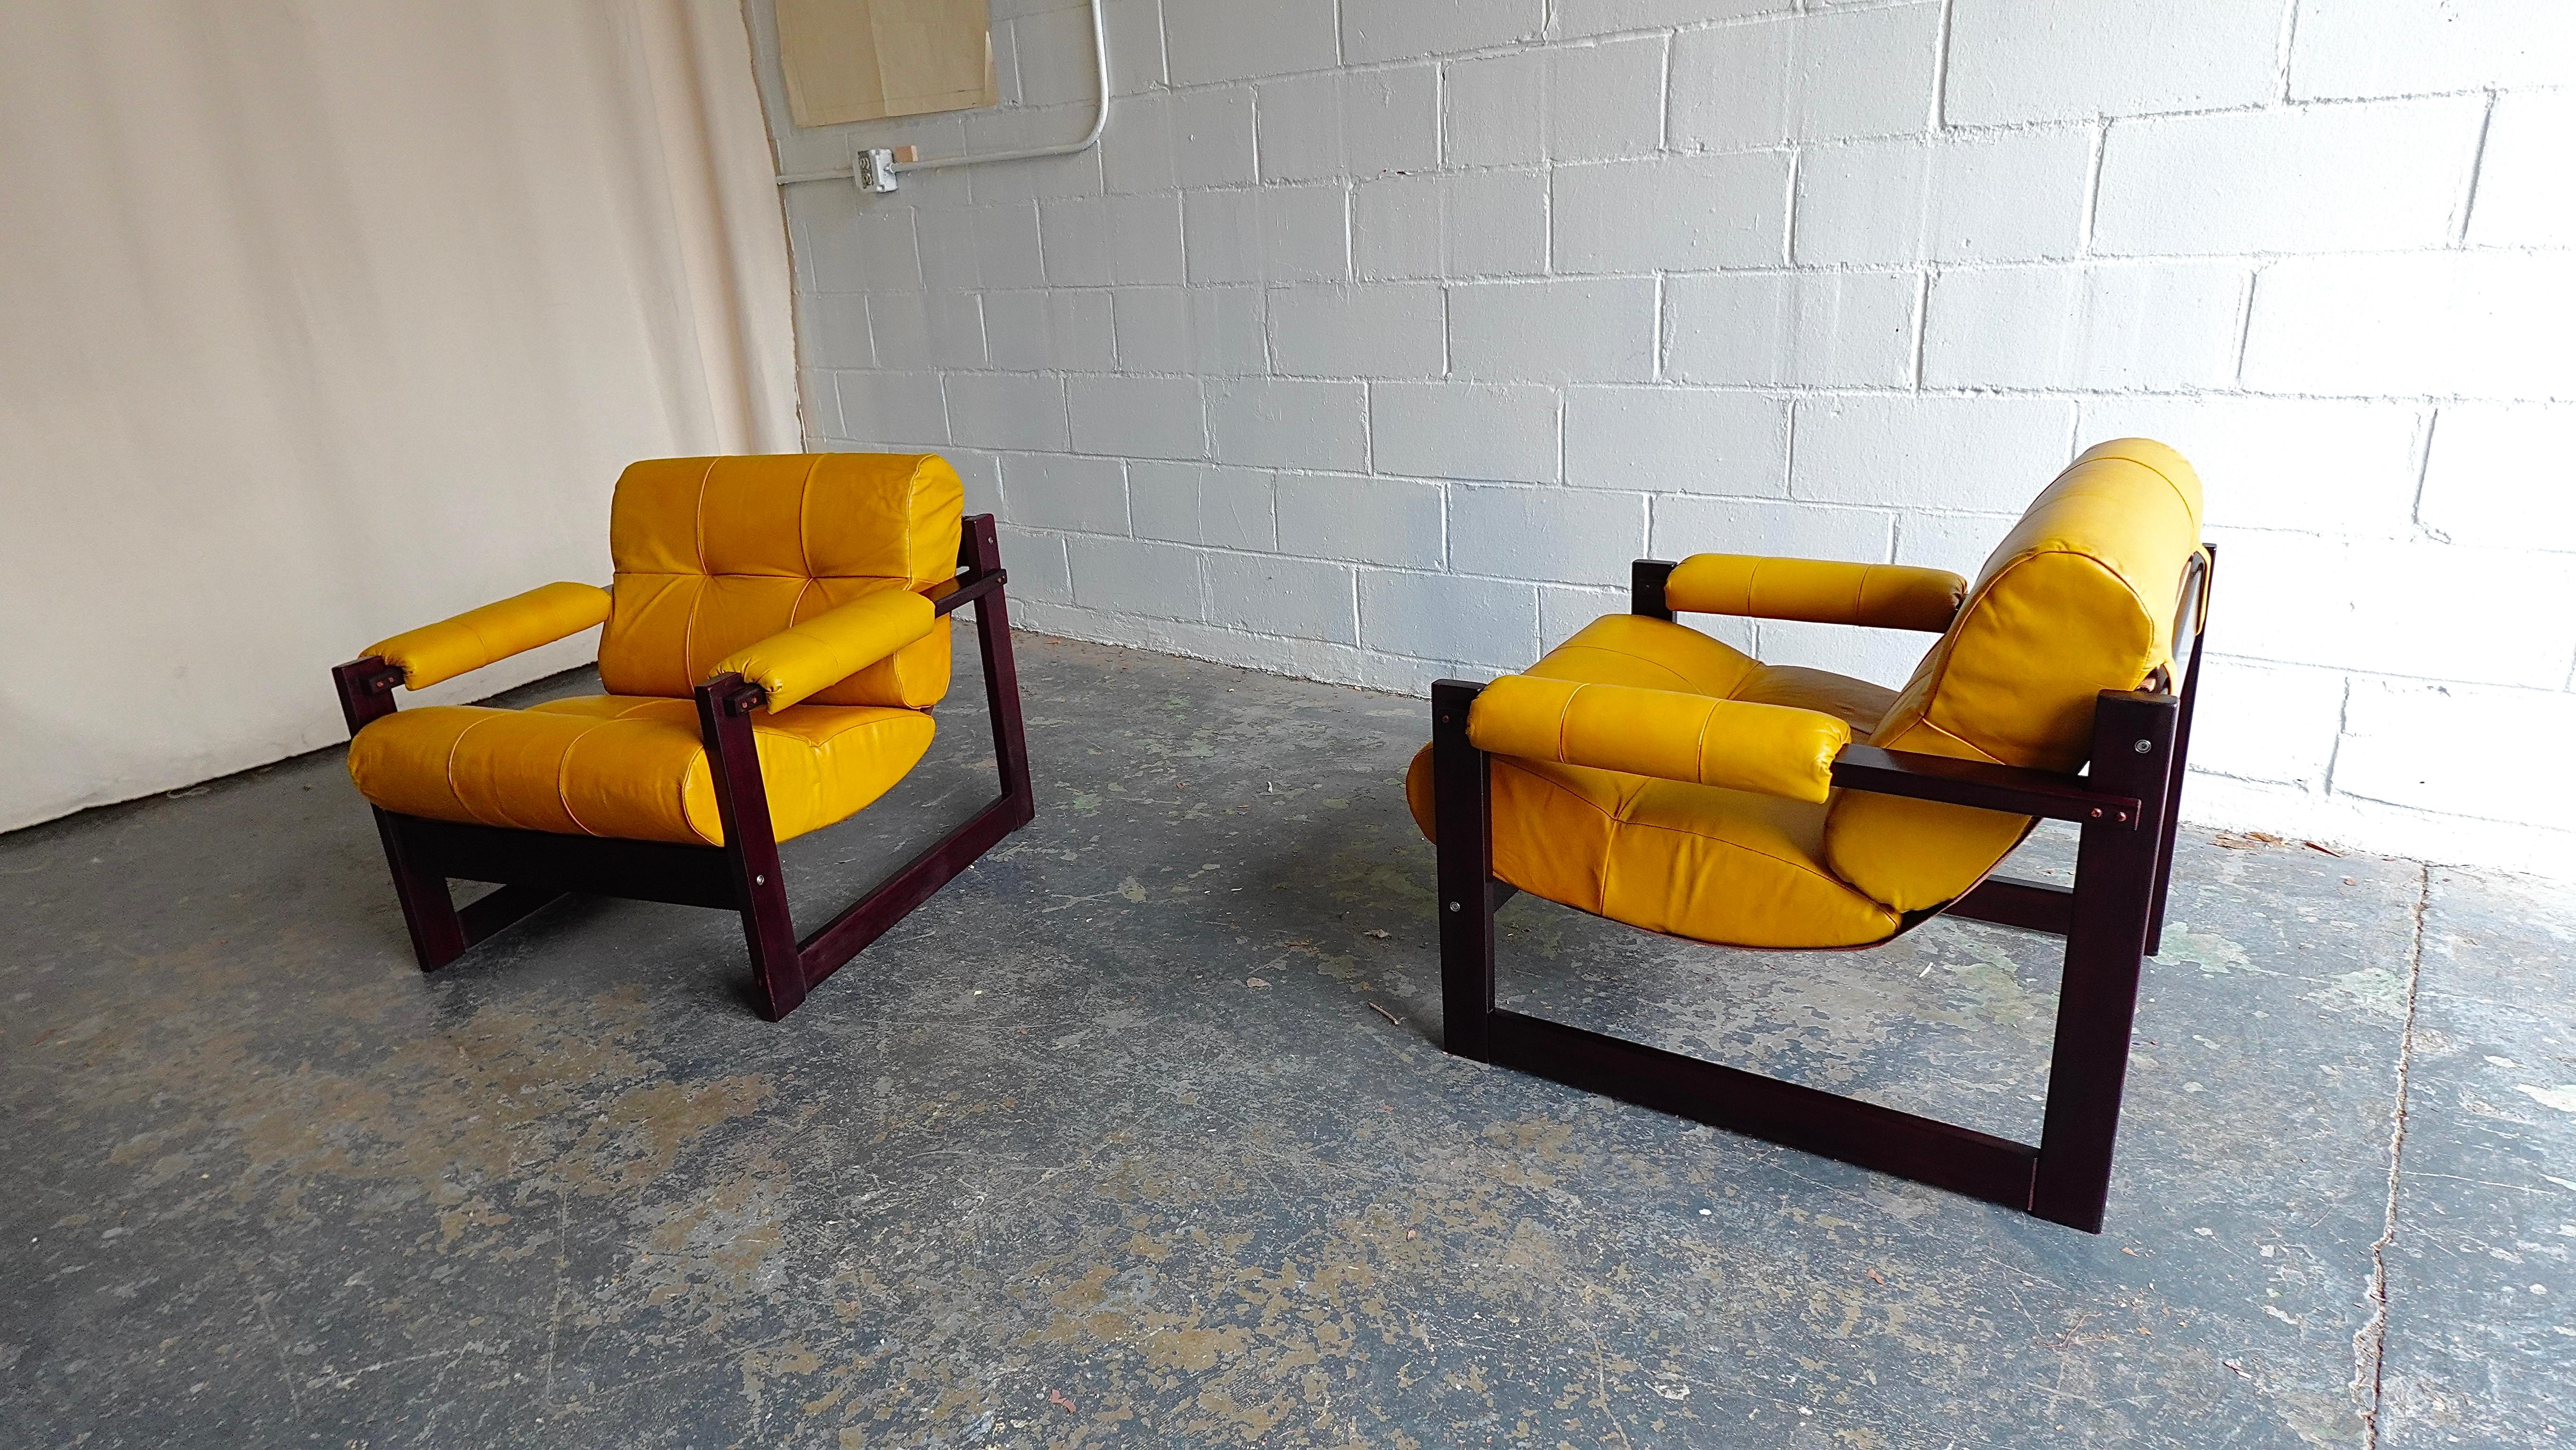 Late 20th Century Pr. Percival Lafer MP-167 Lounge Chairs in Jatoba & Leather, 1970s For Sale